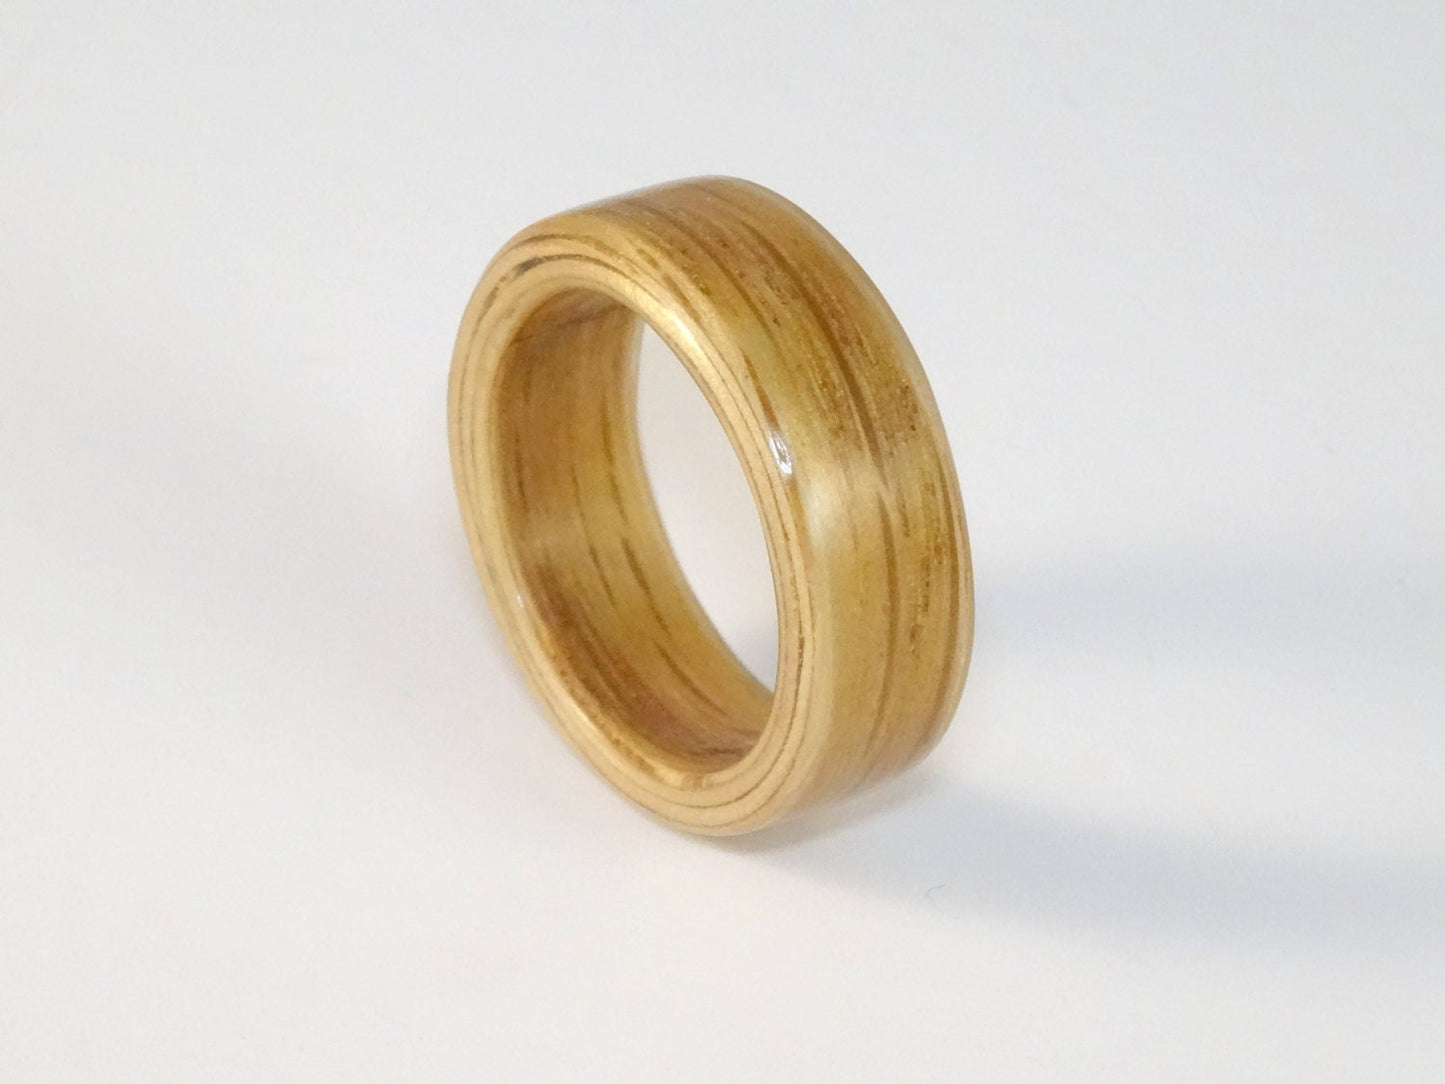 Oak Bent Wood Ring, Handmade to Order In Your UK or US Size.  Wooden Rings for Men or Women